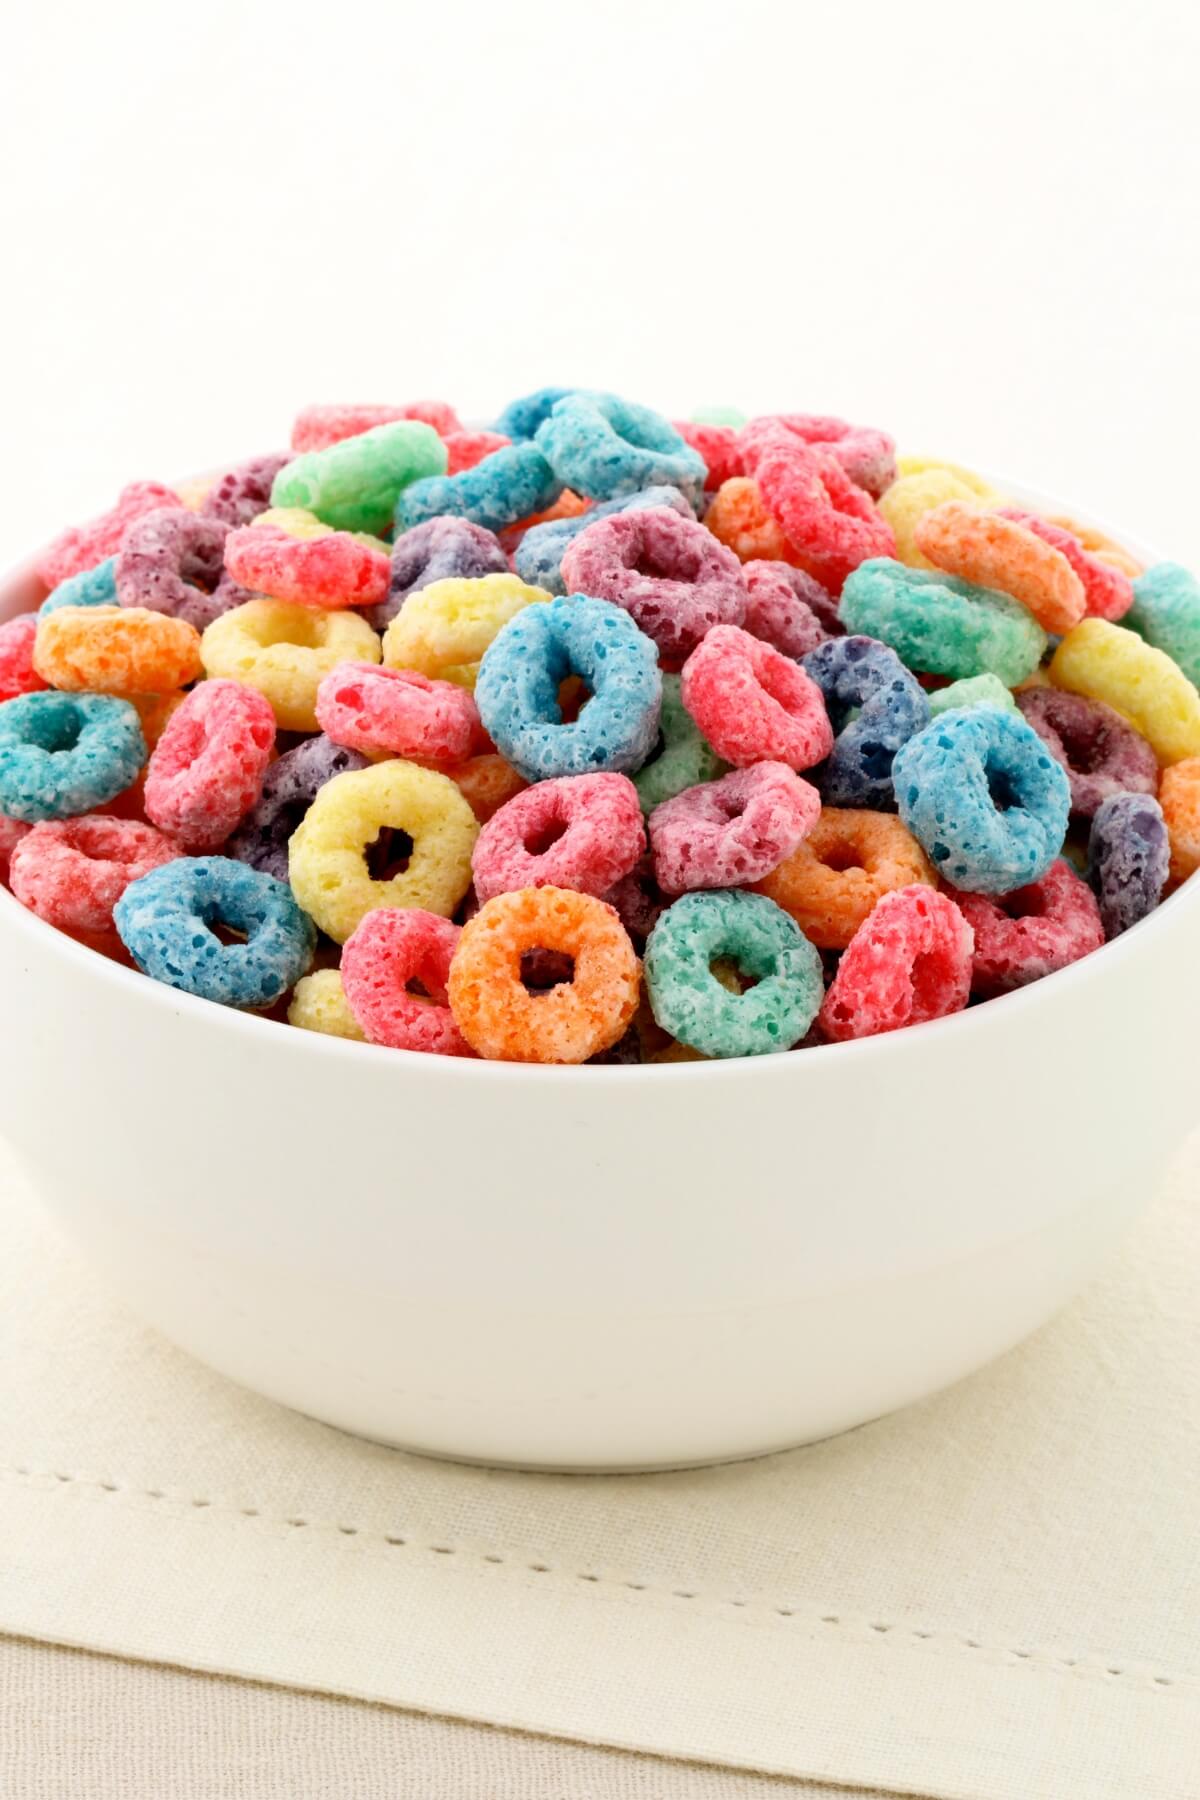 Froot Loops Breakfast Cereal, 43 oz Bag, 2 Bags/Box, Ships in 1-3 Business  Days - Office Express Office Products